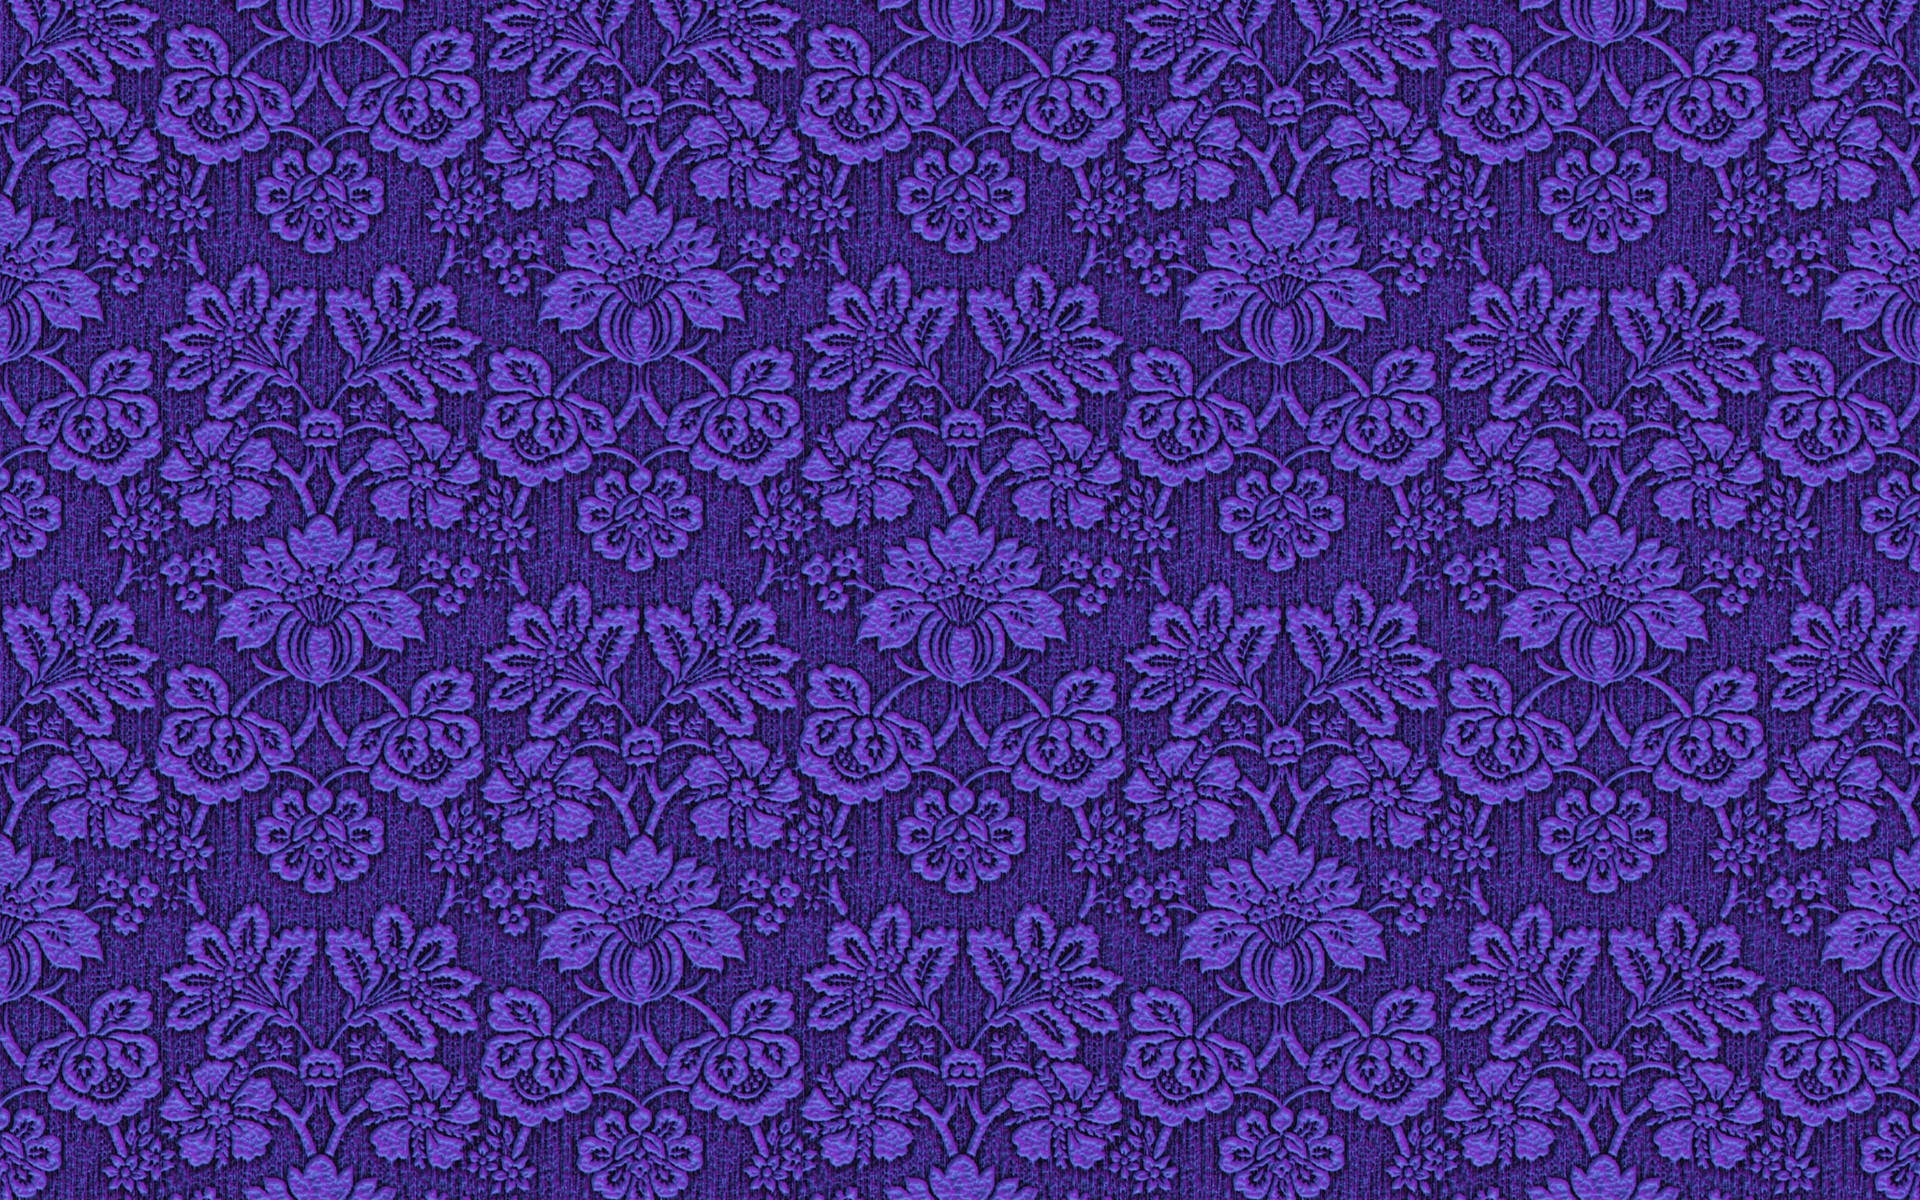 Violet Aesthetic Floral Fabric Wallpaper